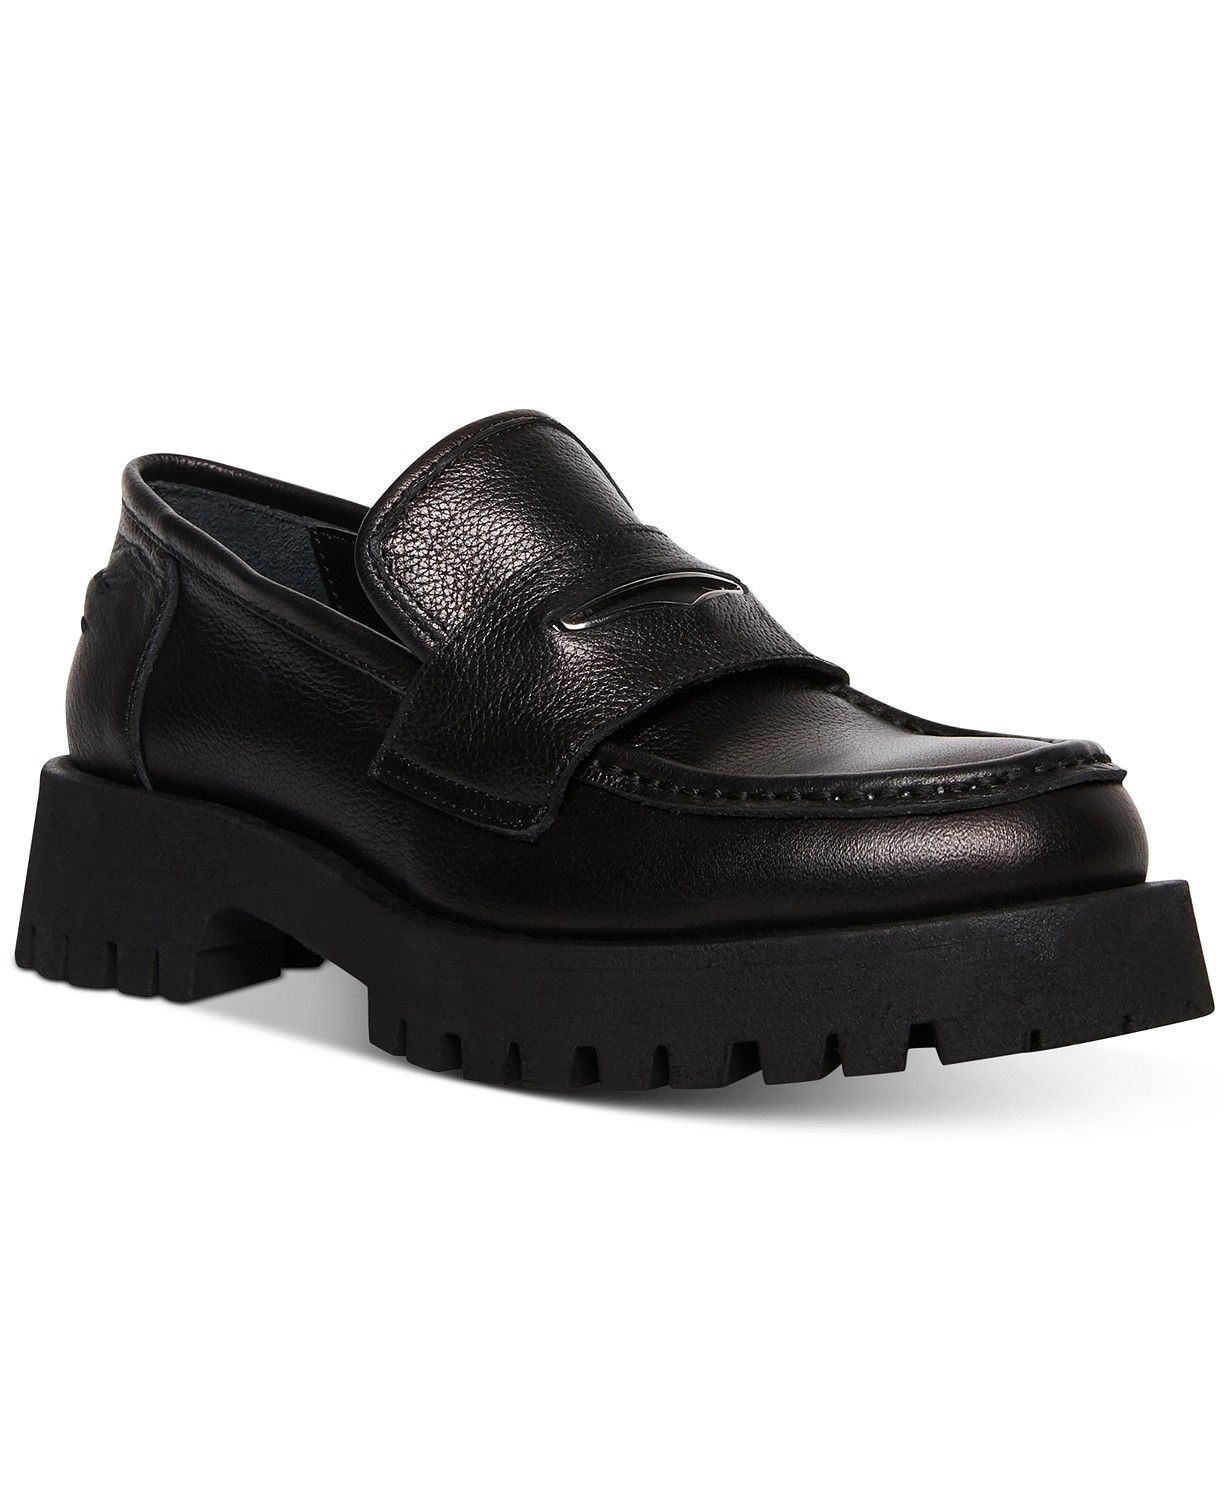 Steve Madden Women's Lawrence Lug Loafers & Reviews - Slippers - Shoes - Macy's | Macys (US)